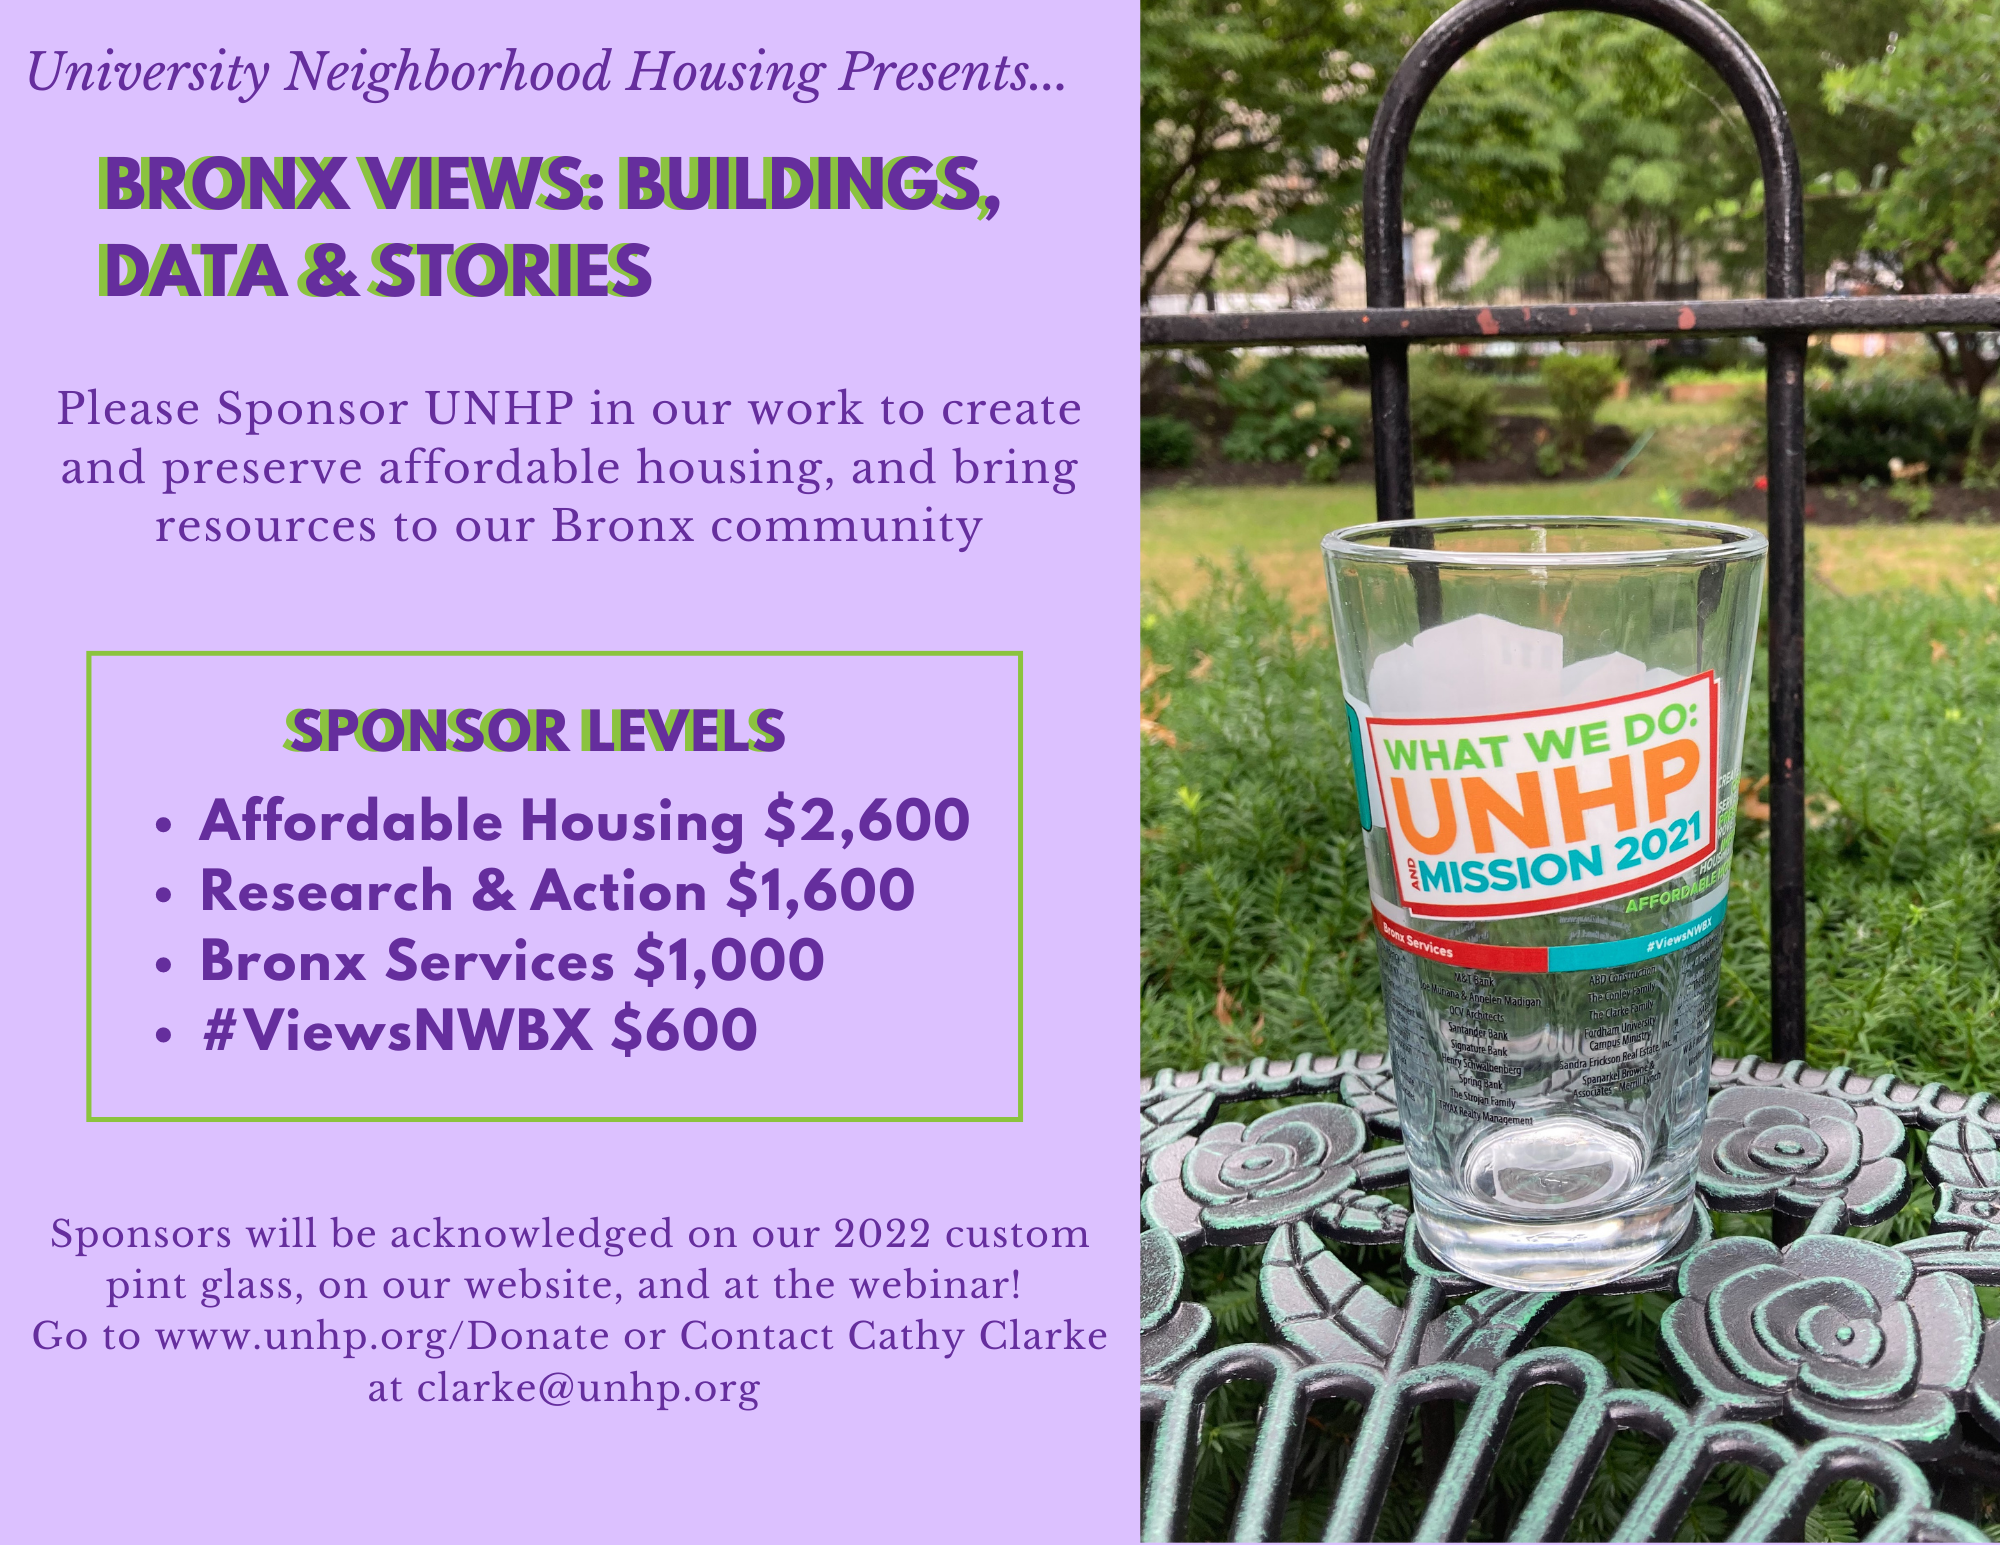 Join UNHP as a Sponsor! Your sponsorship supports our work and gets your name on this year's custom pint glass!